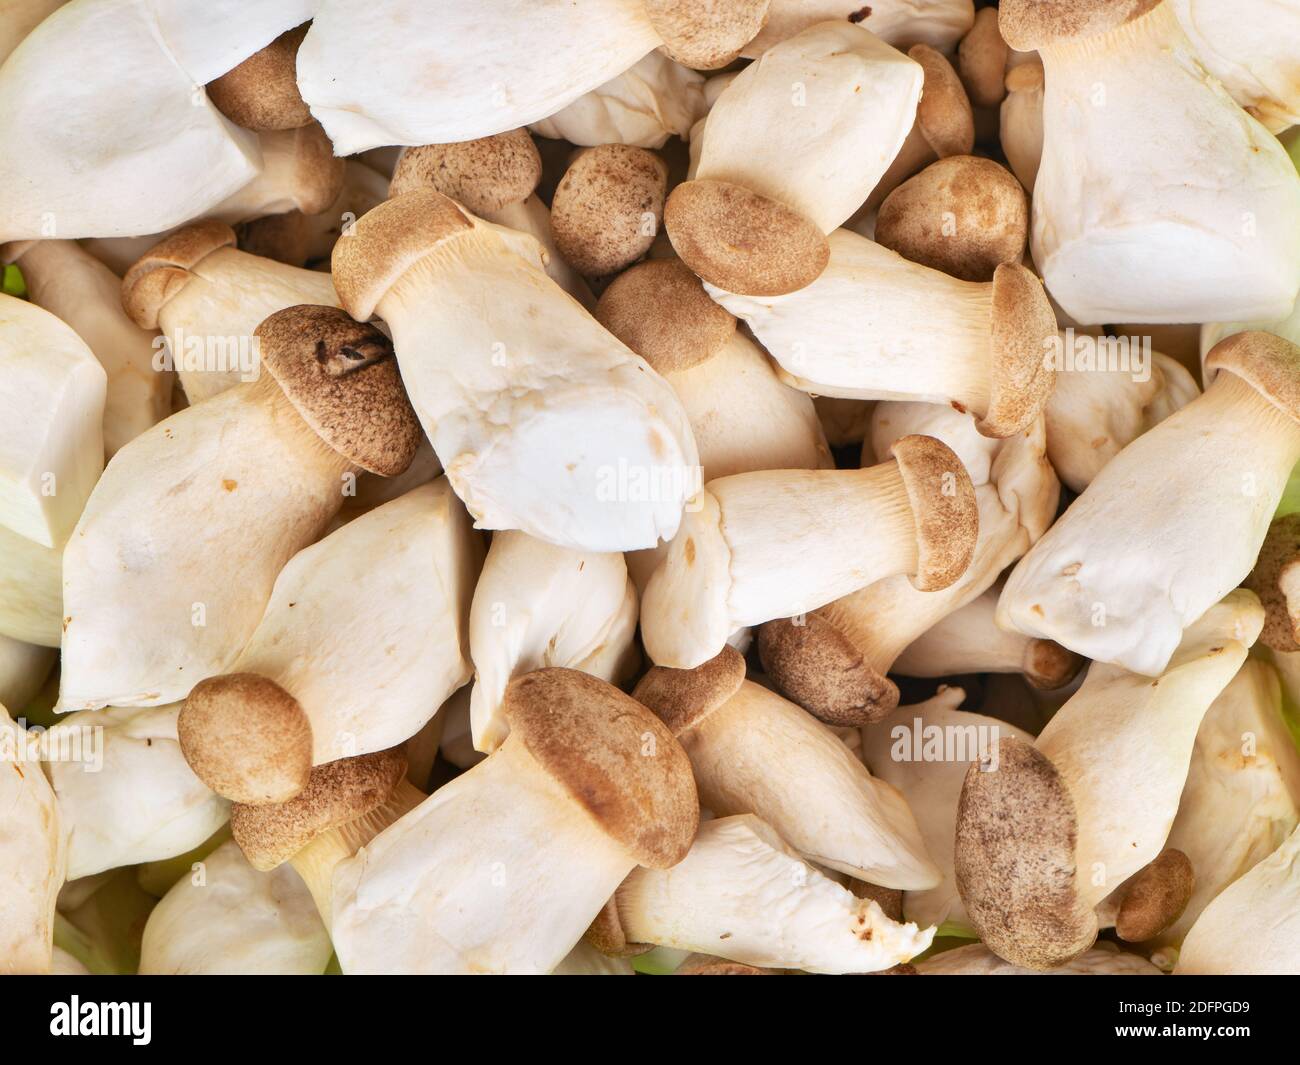 Scattered small eringi mushrooms close up, top view Stock Photo